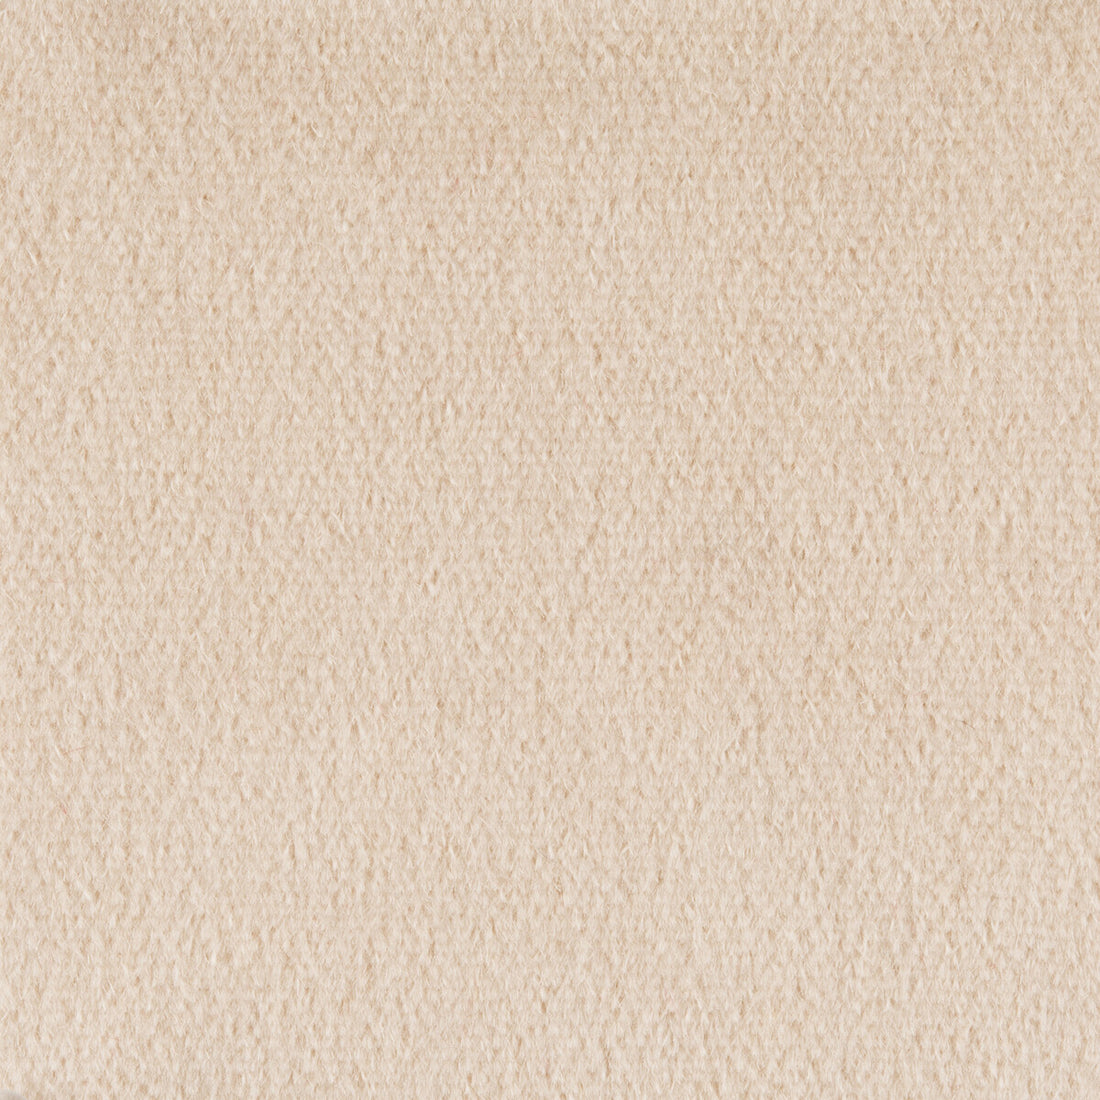 Plazzo Mohair fabric in sand color - pattern 34259.012.0 - by Kravet Couture